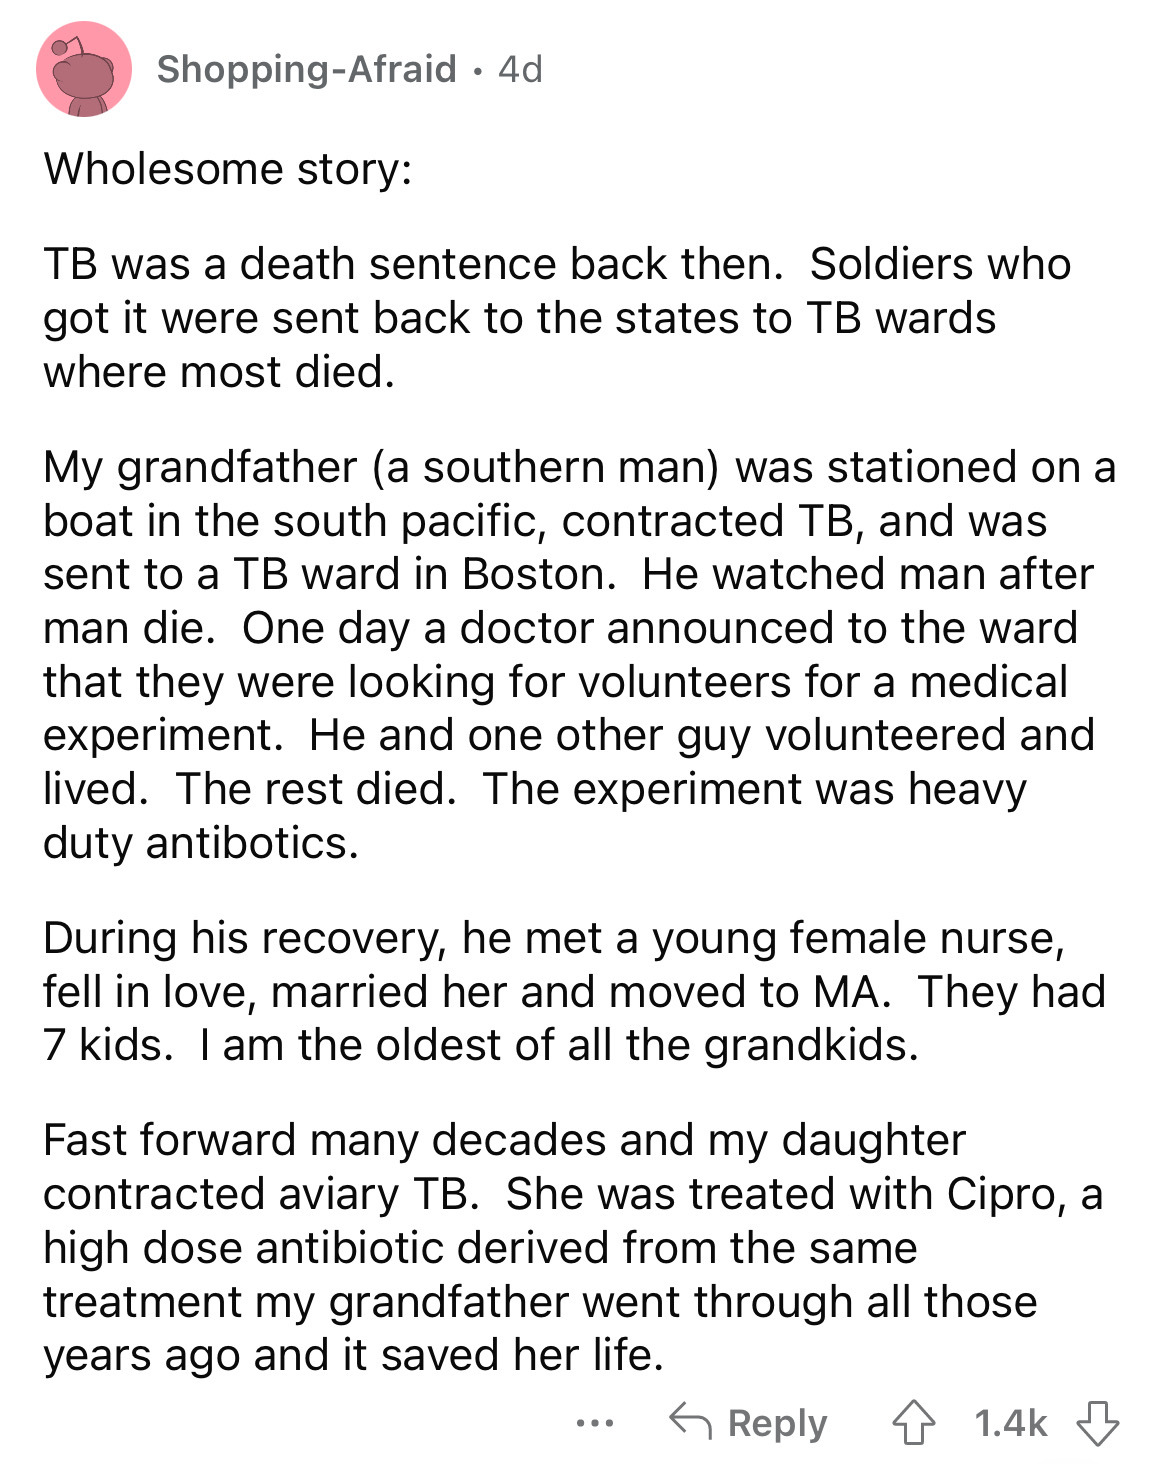 document - ShoppingAfraid . 4d Wholesome story Tb was a death sentence back then. Soldiers who got it were sent back to the states to Tb wards where most died. My grandfather a southern man was stationed on a boat in the south pacific, contracted Tb, and 